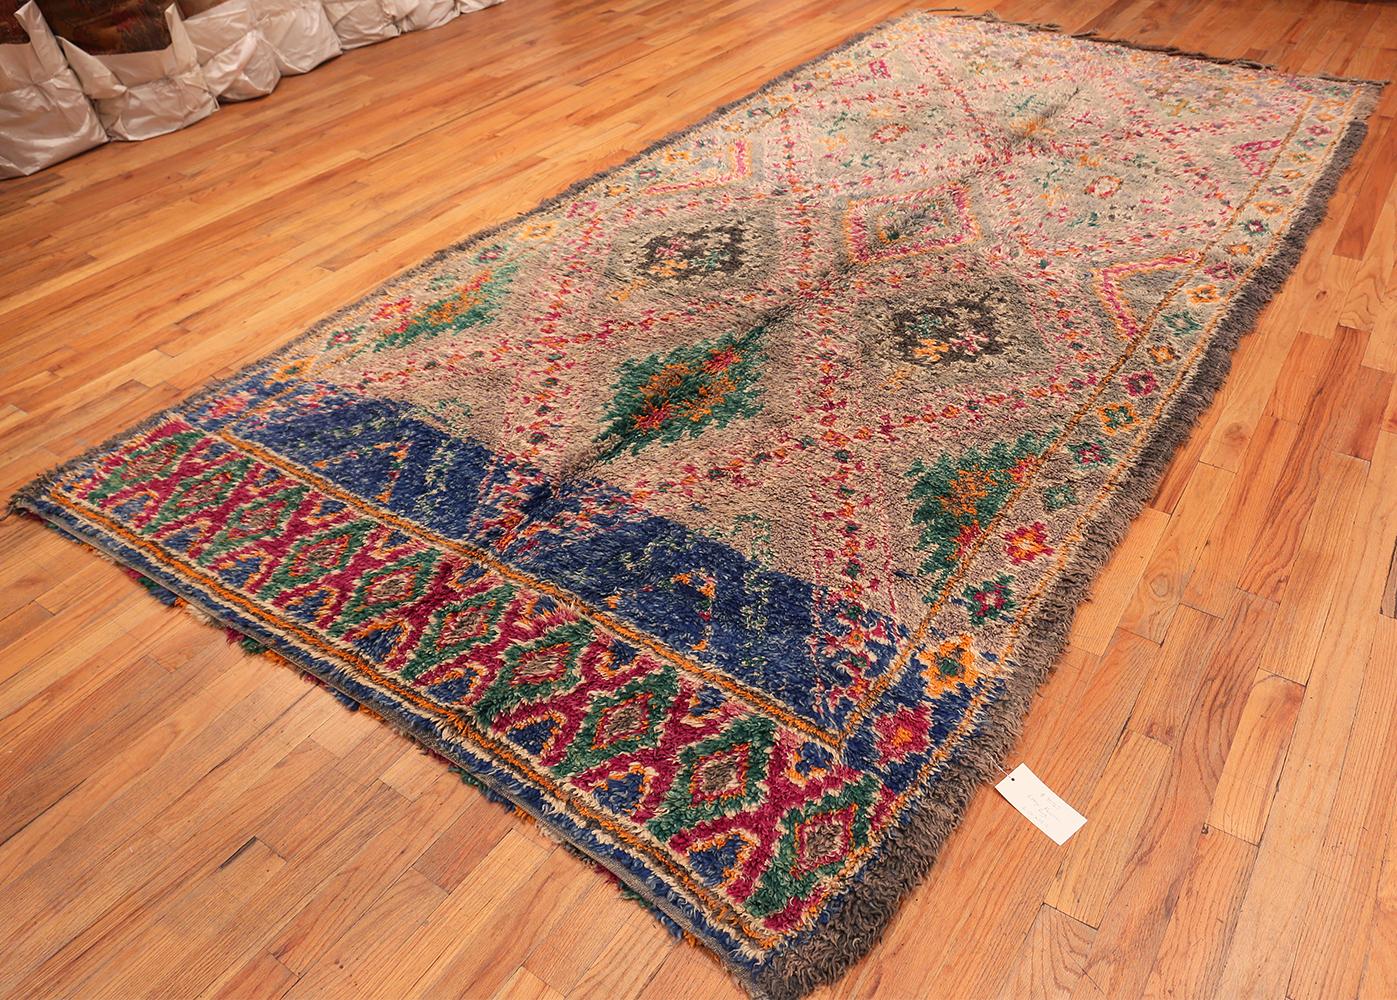 20th Century Vintage Folk Art Moroccan Rug. Size: 6 ft. 10 in x 14 ft. (2.08 m x 4.27 m) For Sale